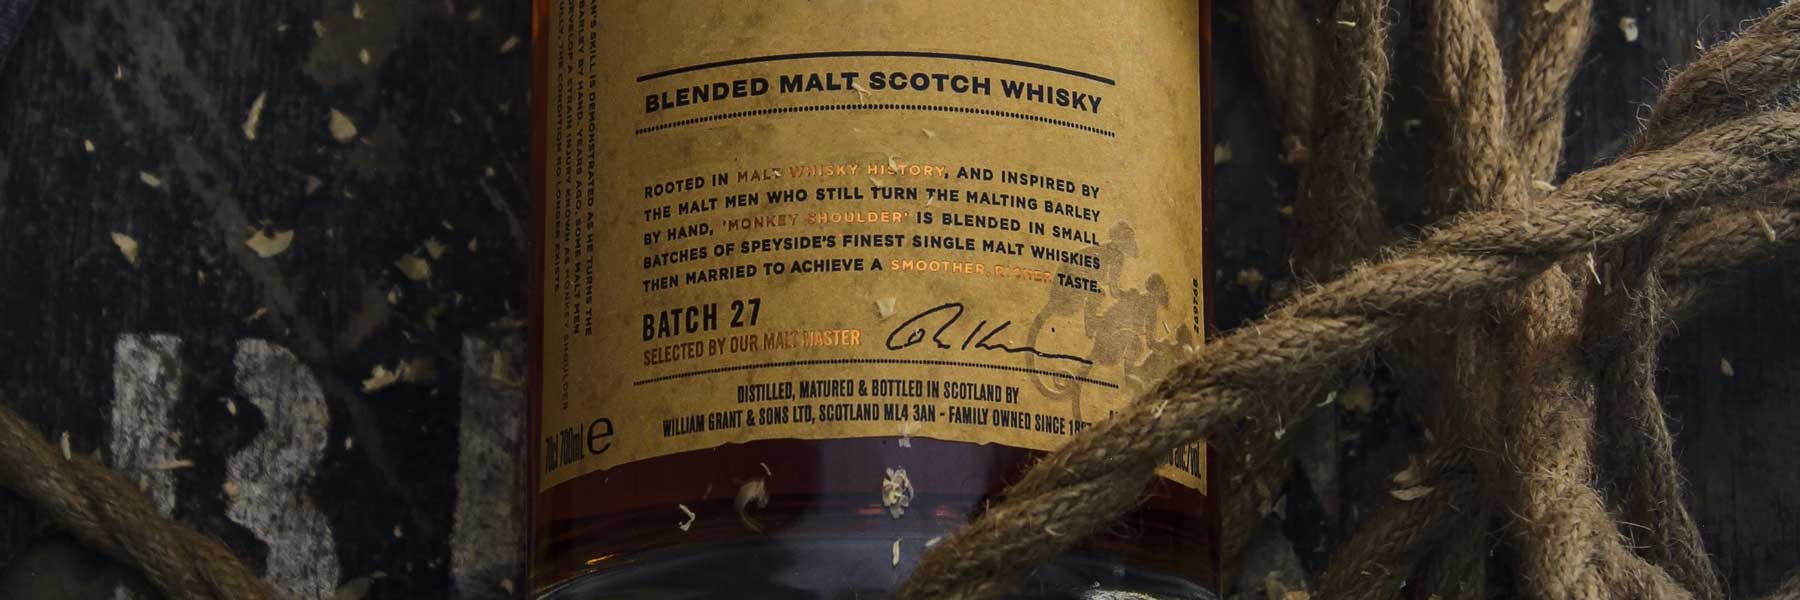 What is blended malt Scotch whisky